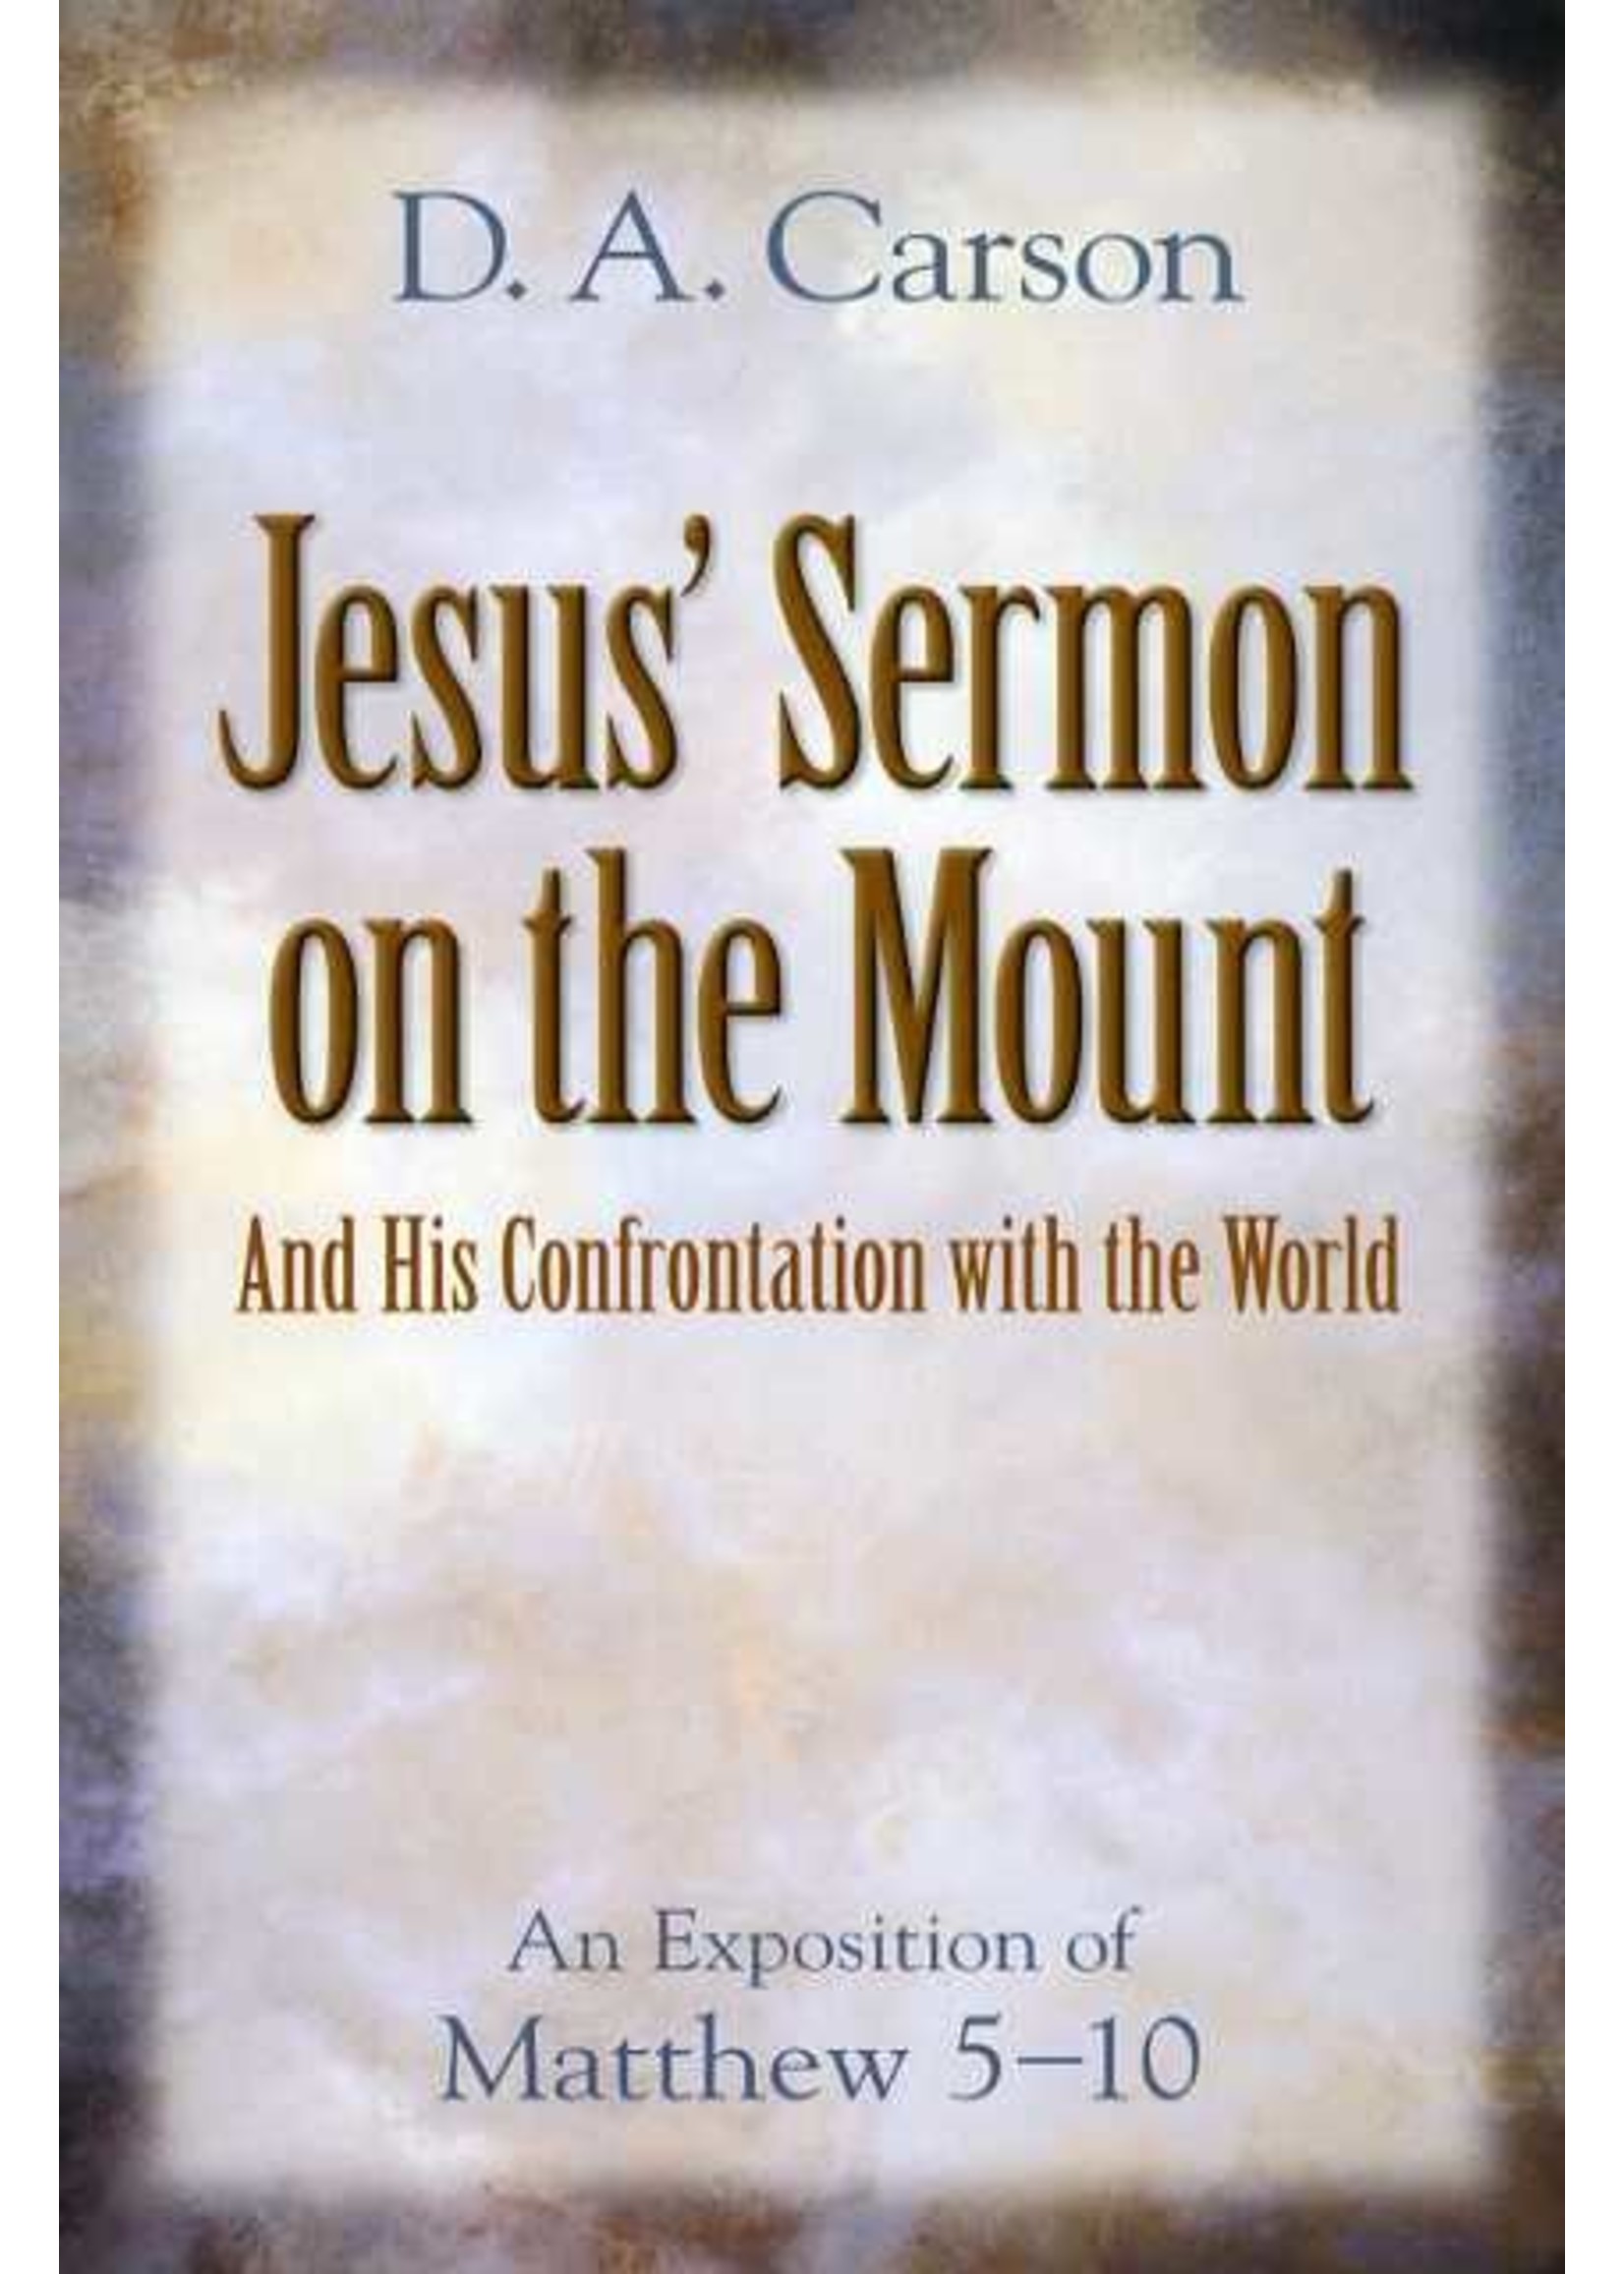 Baker Publishing Jesus' Sermon on the Mount and His Confrontation with the World - D. A. Carson